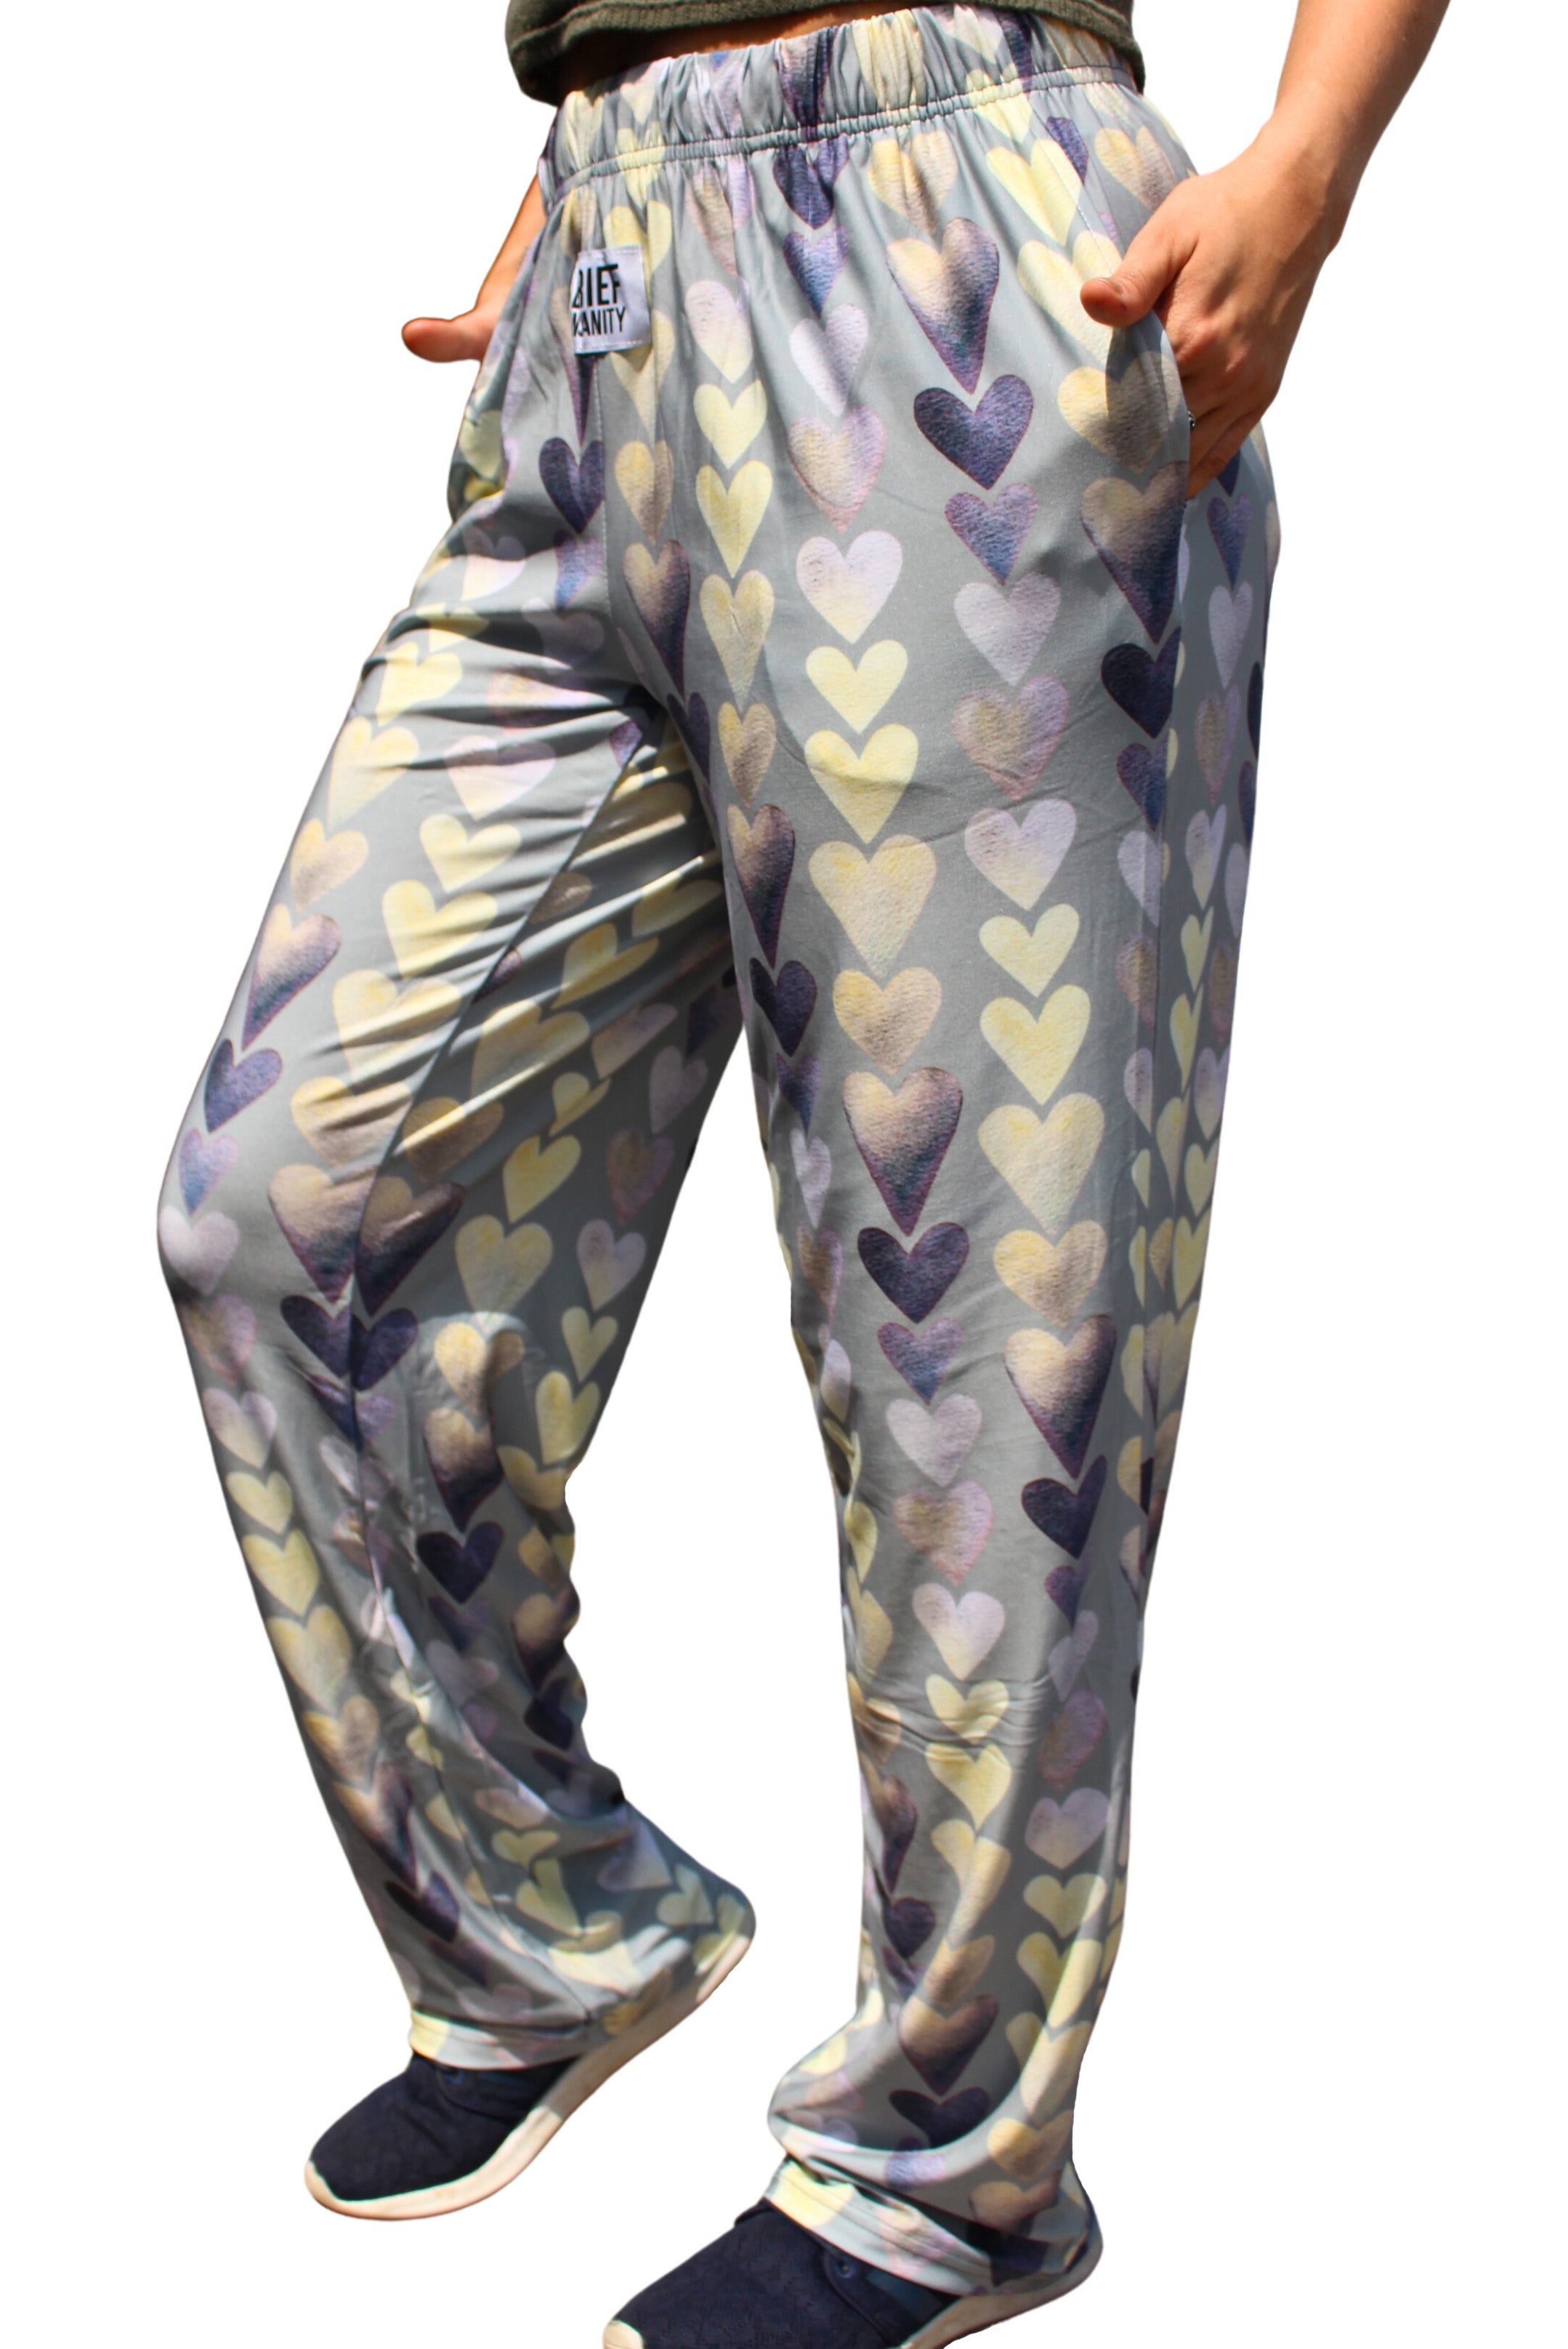 Person modeling BRIEF INSANITY Heart Pattern Pajama Lounge Pants